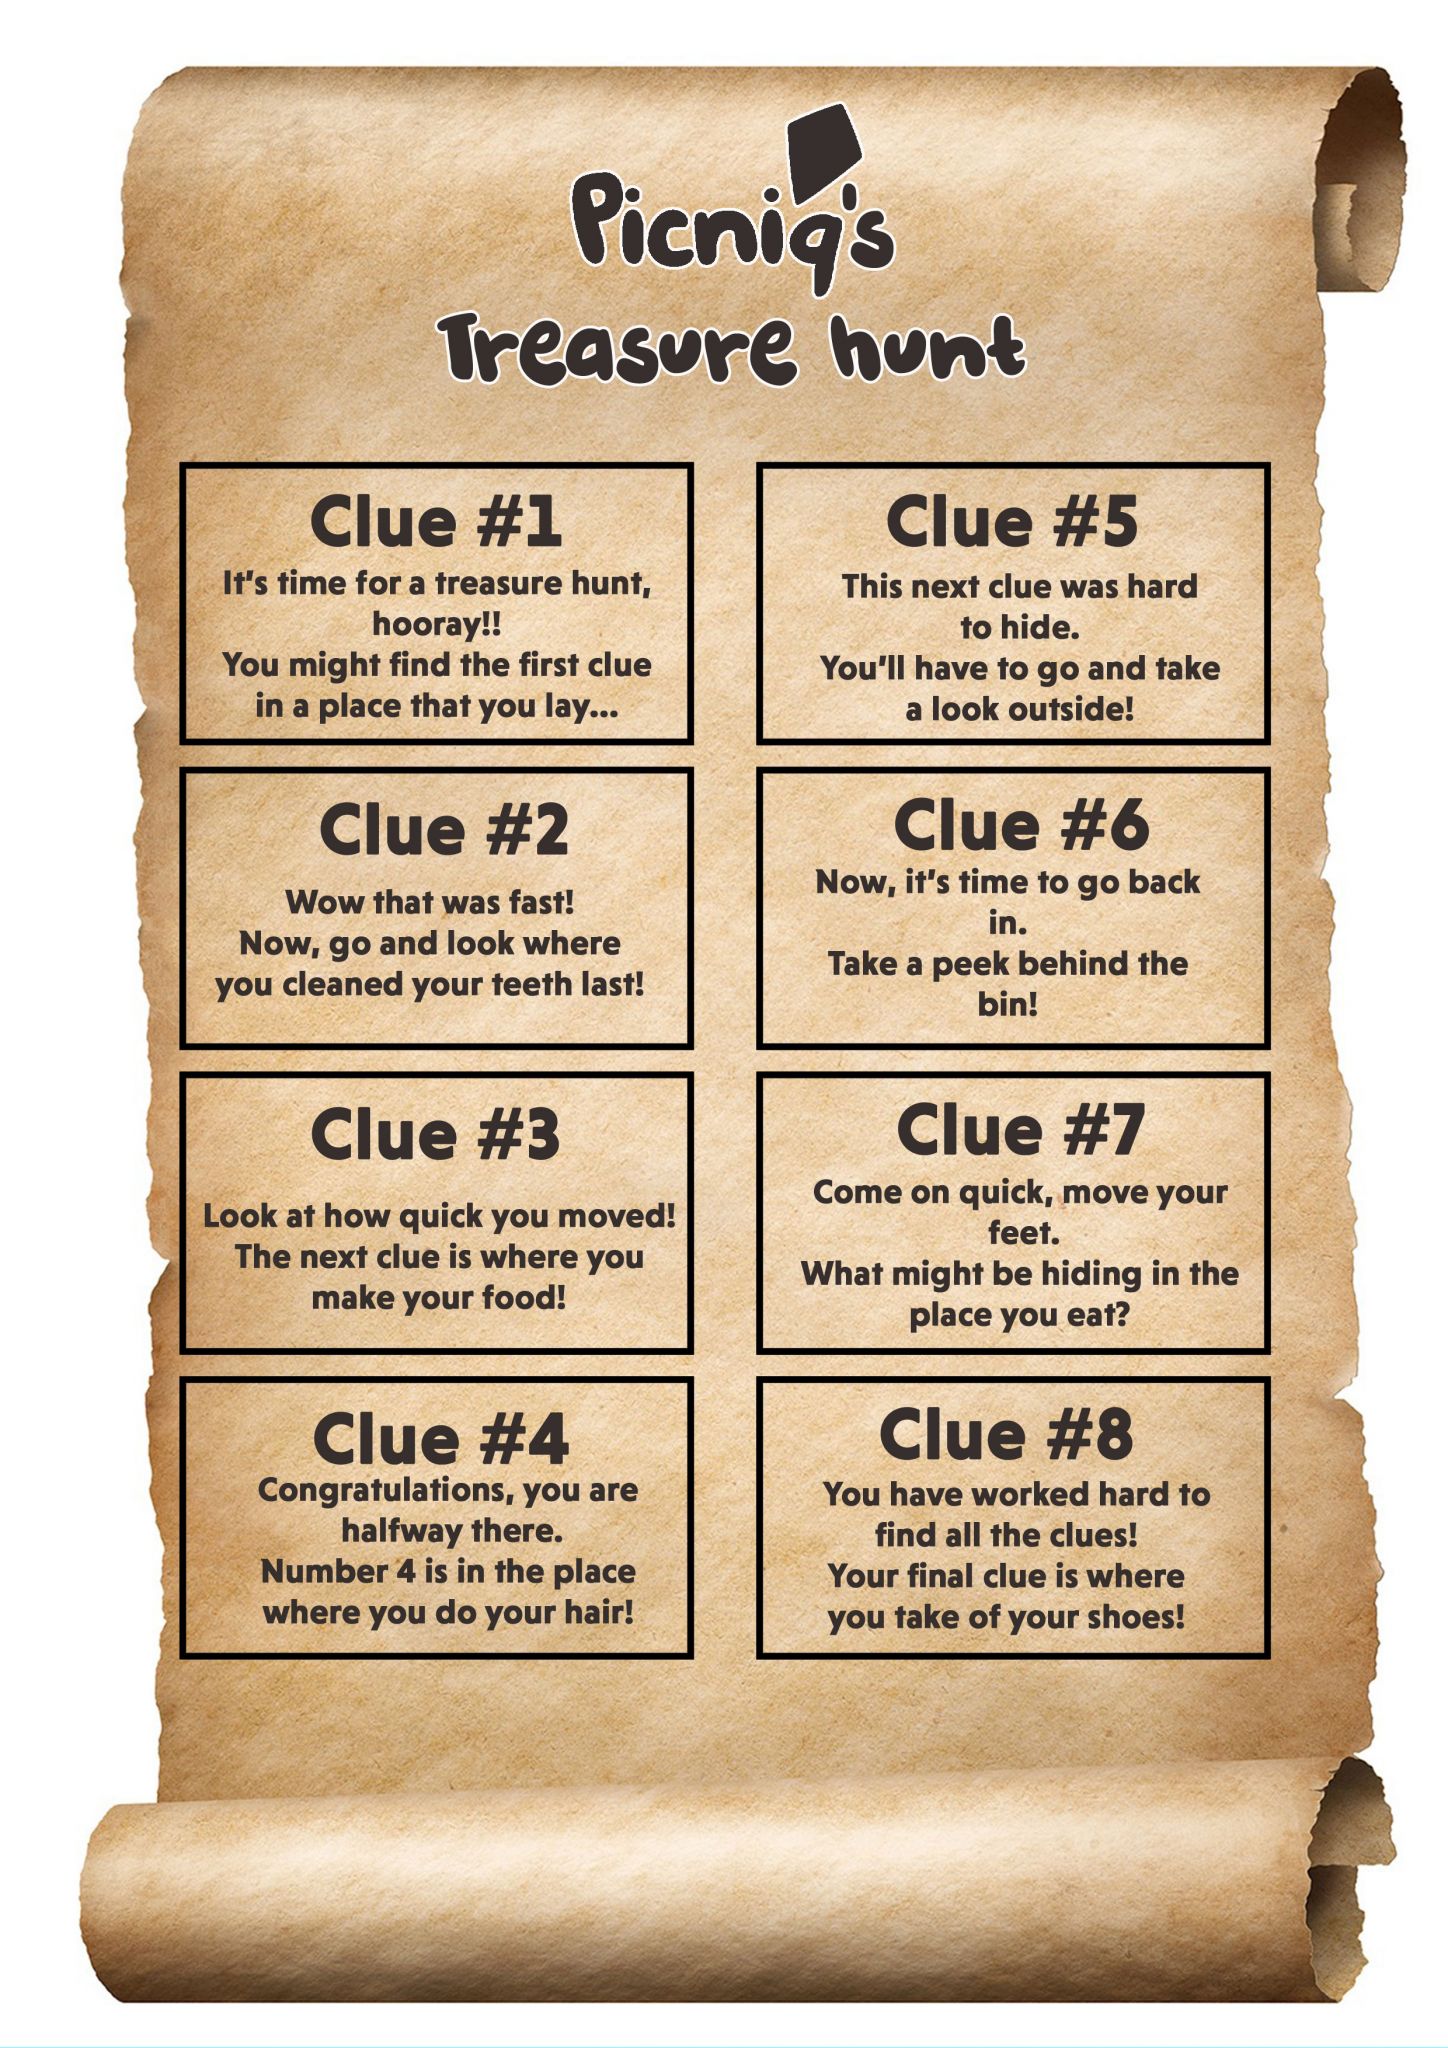 Make sure to check out our treasure hunt this weekend